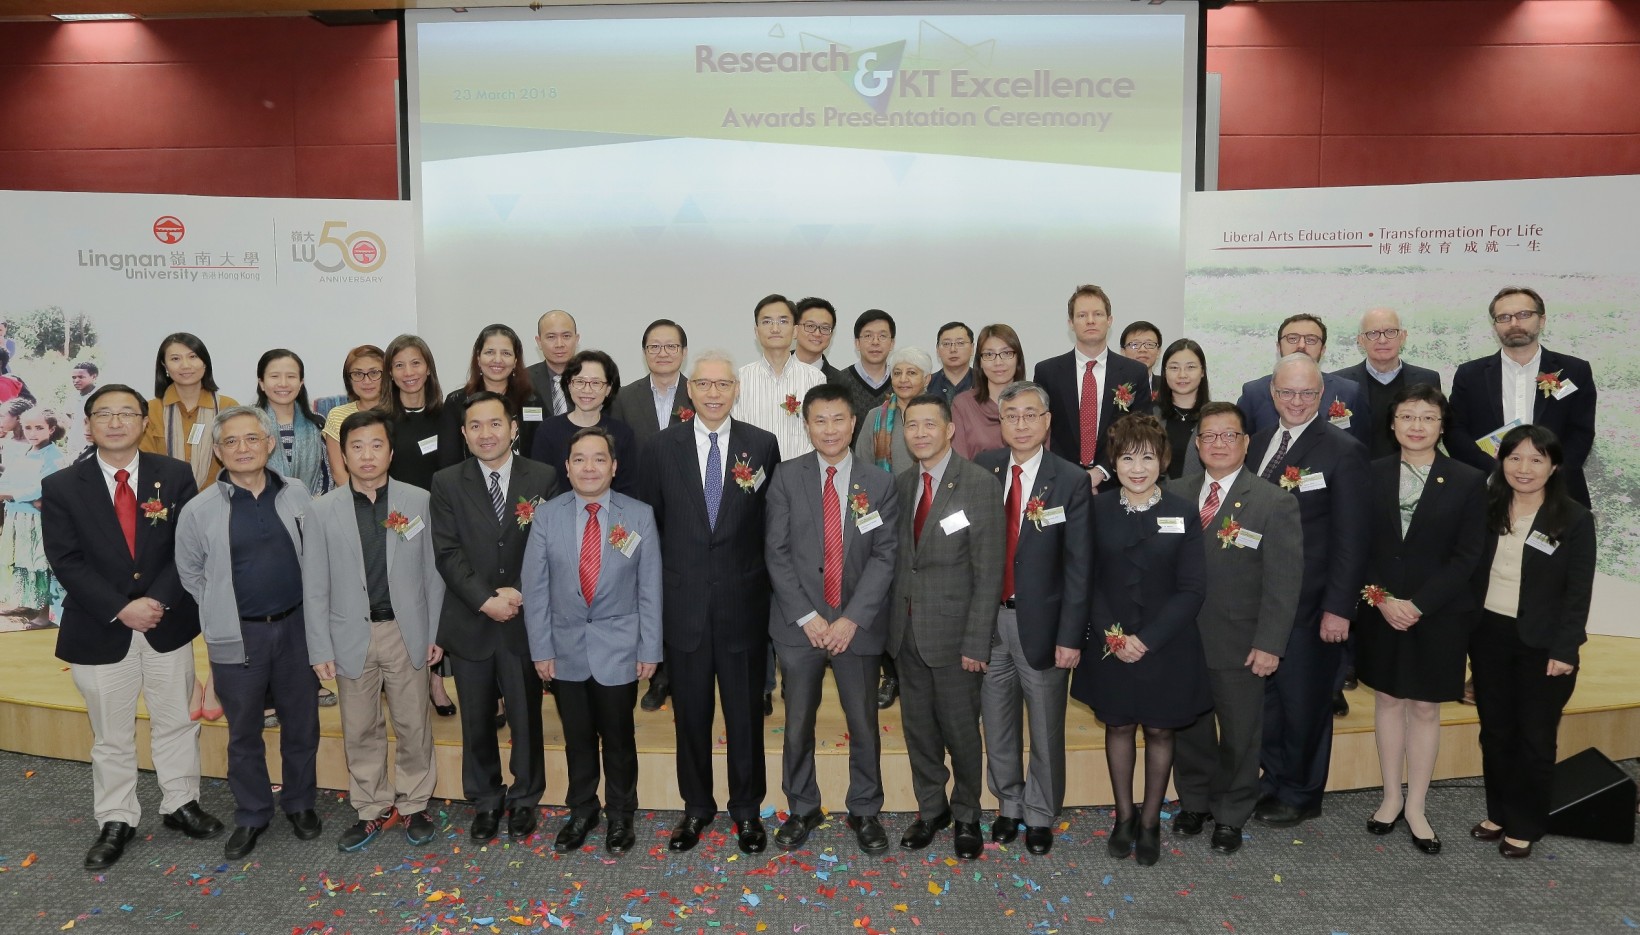 Research and Knowledge Transfer Excellence Awards Presentation Ceremony